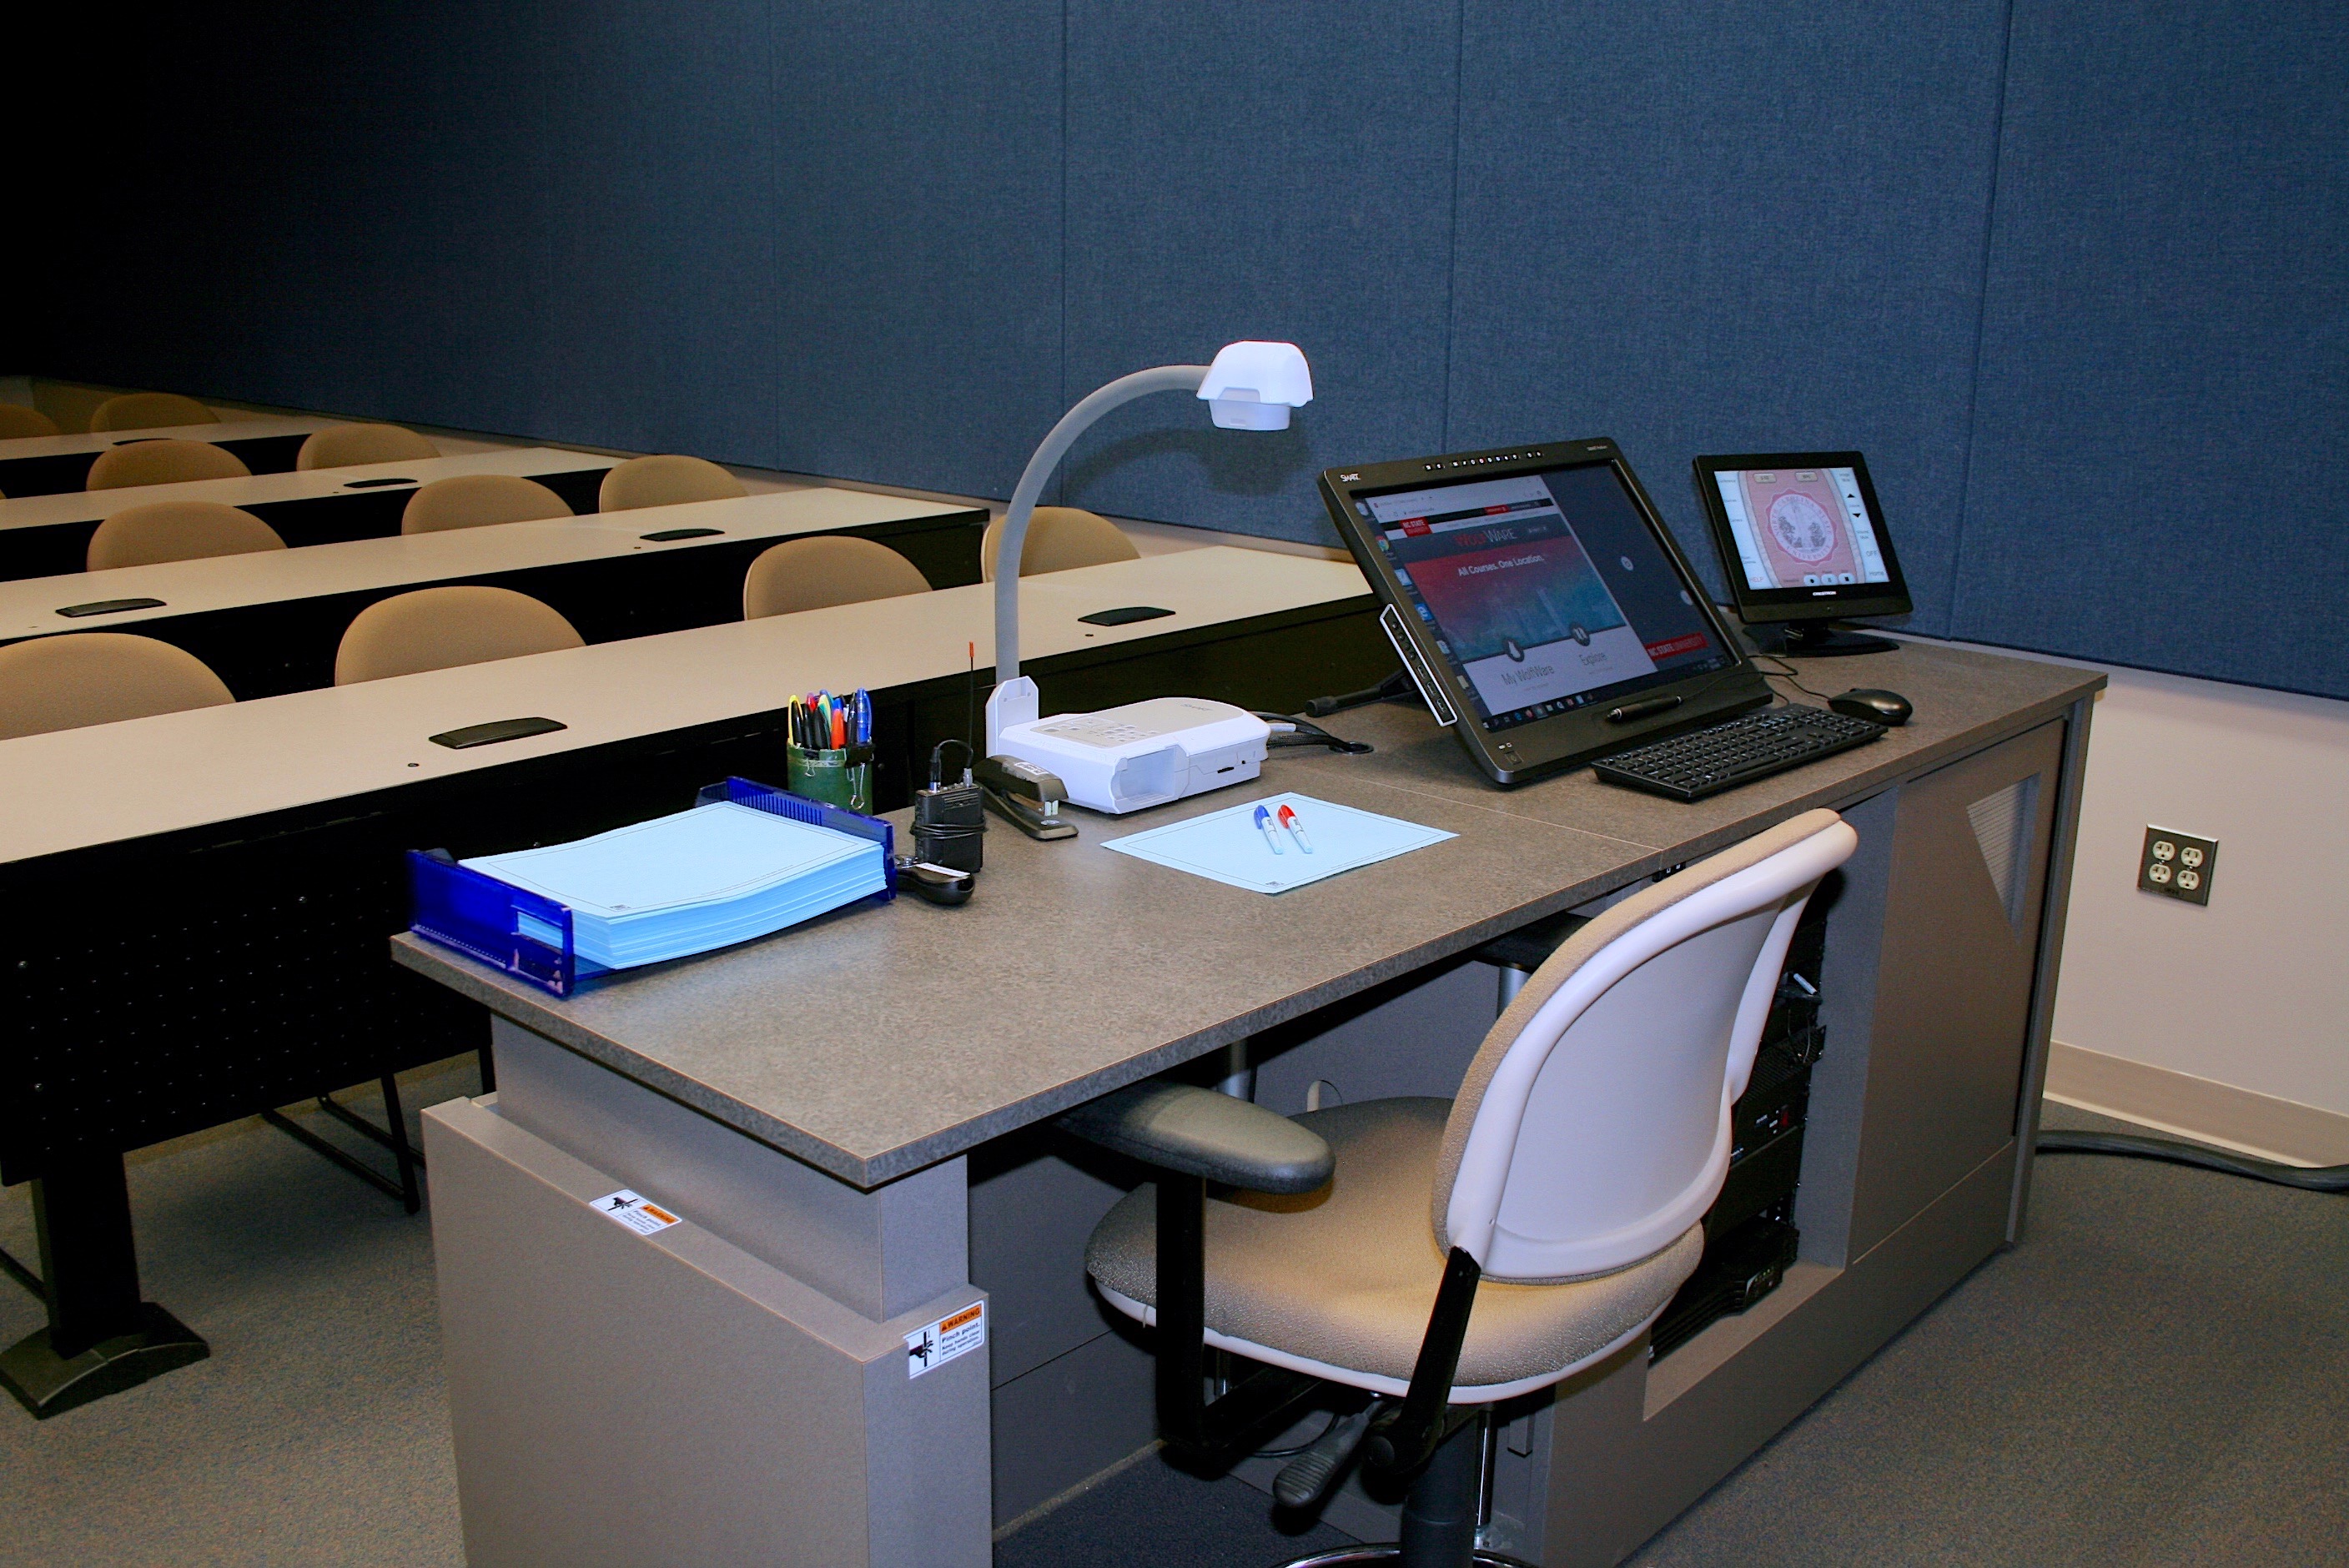 A picture of classroom equipment available.